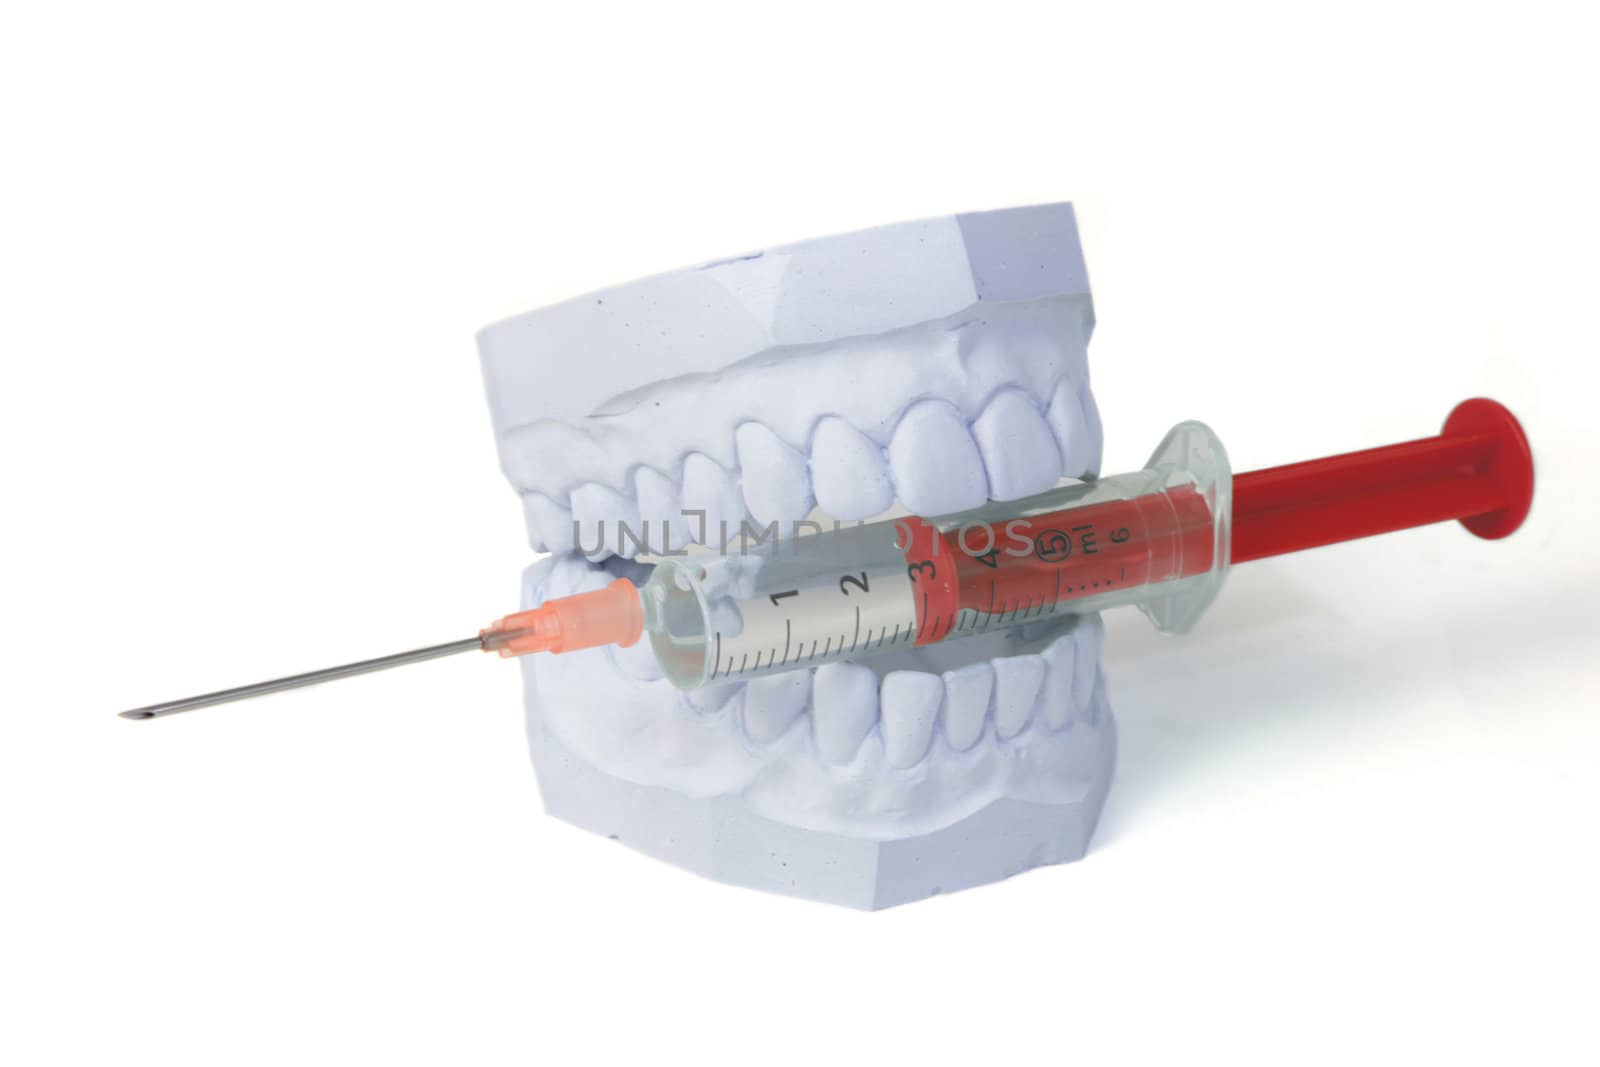 A plaster cast of a set of teeth bites into a syringe. All isolated on white background.